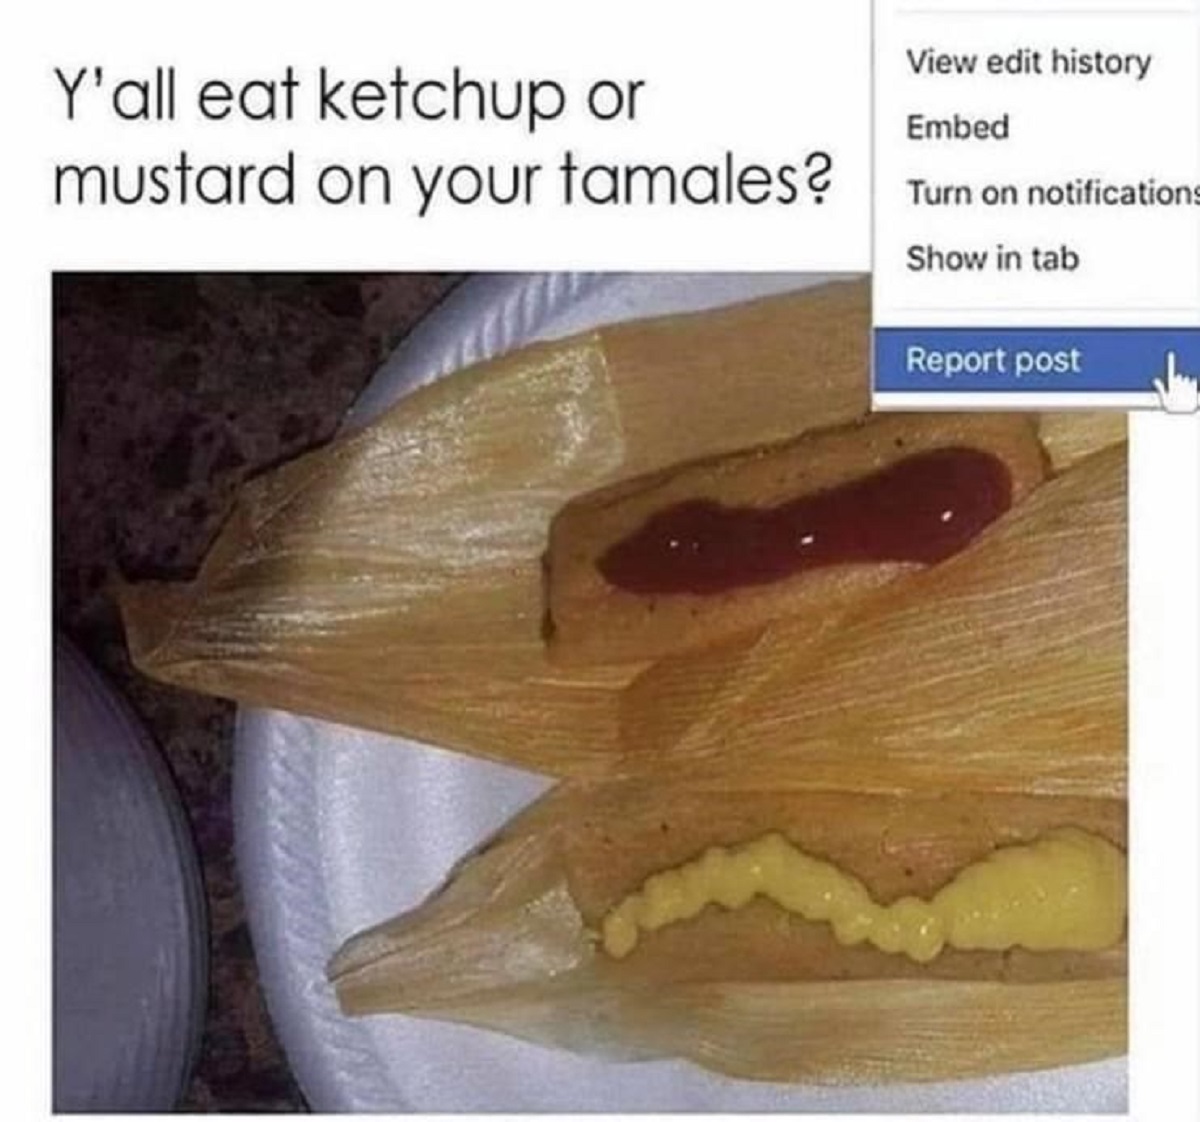 wood - View edit history Y'all eat ketchup or Embed mustard on your tamales? Turn on notifications Show in tab Report post